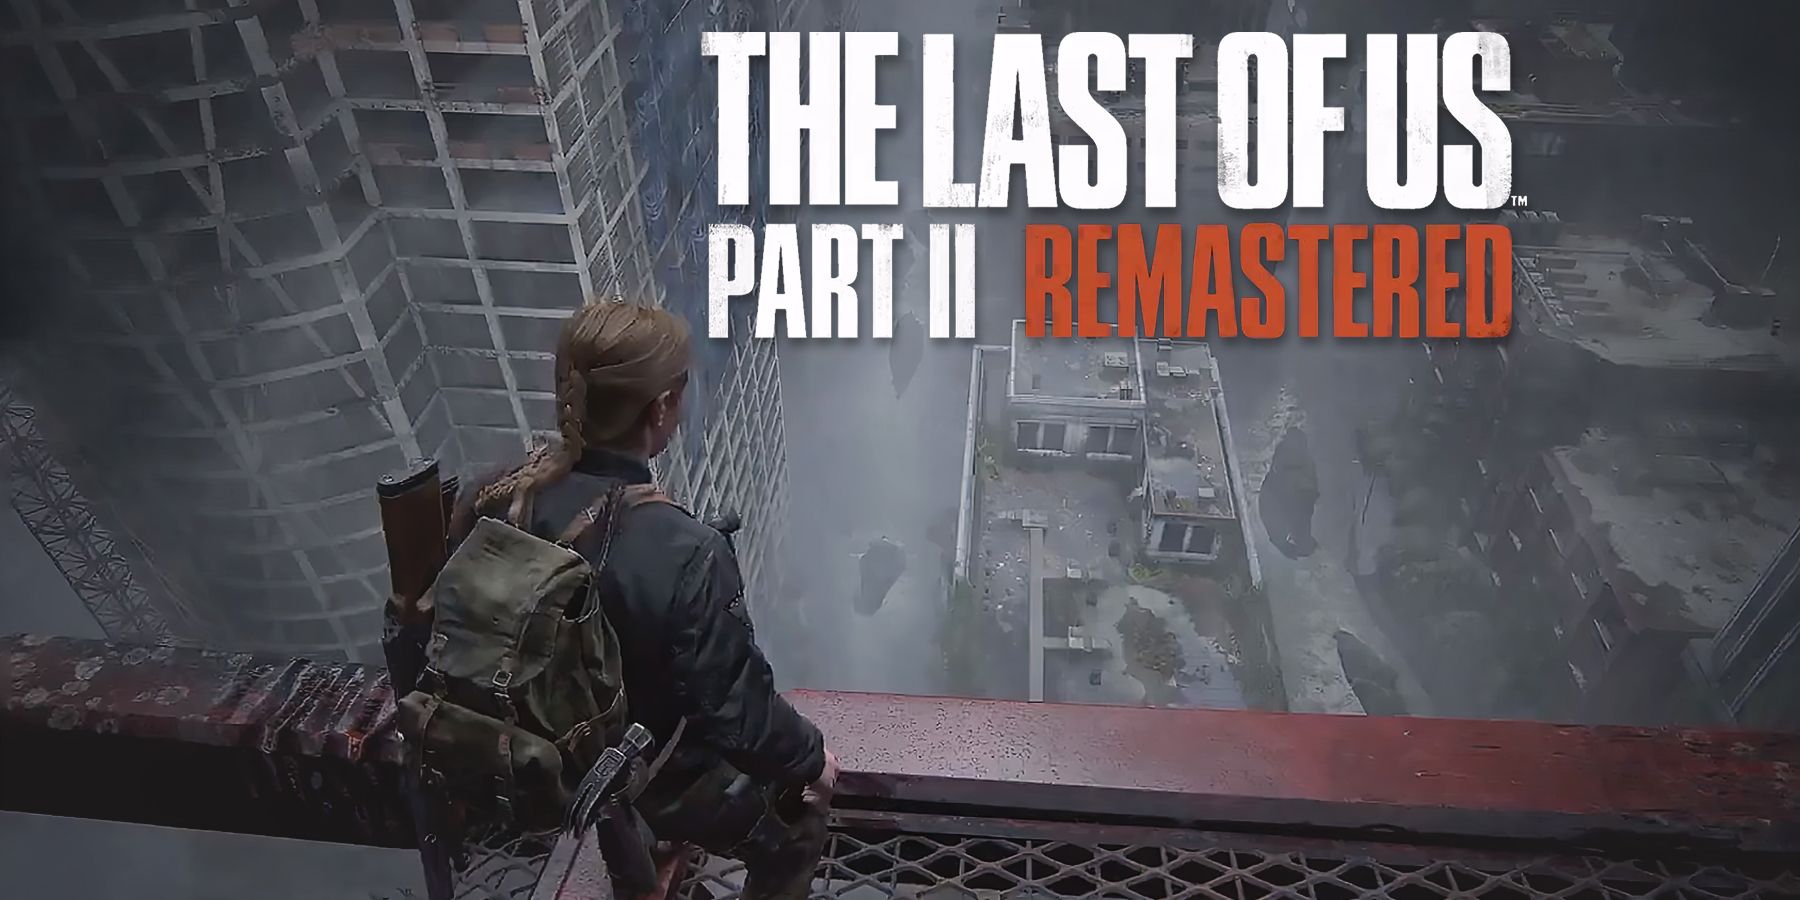 Rumor: The Last of Us 2 Remastered Roguelike Mode May Be Quite Large